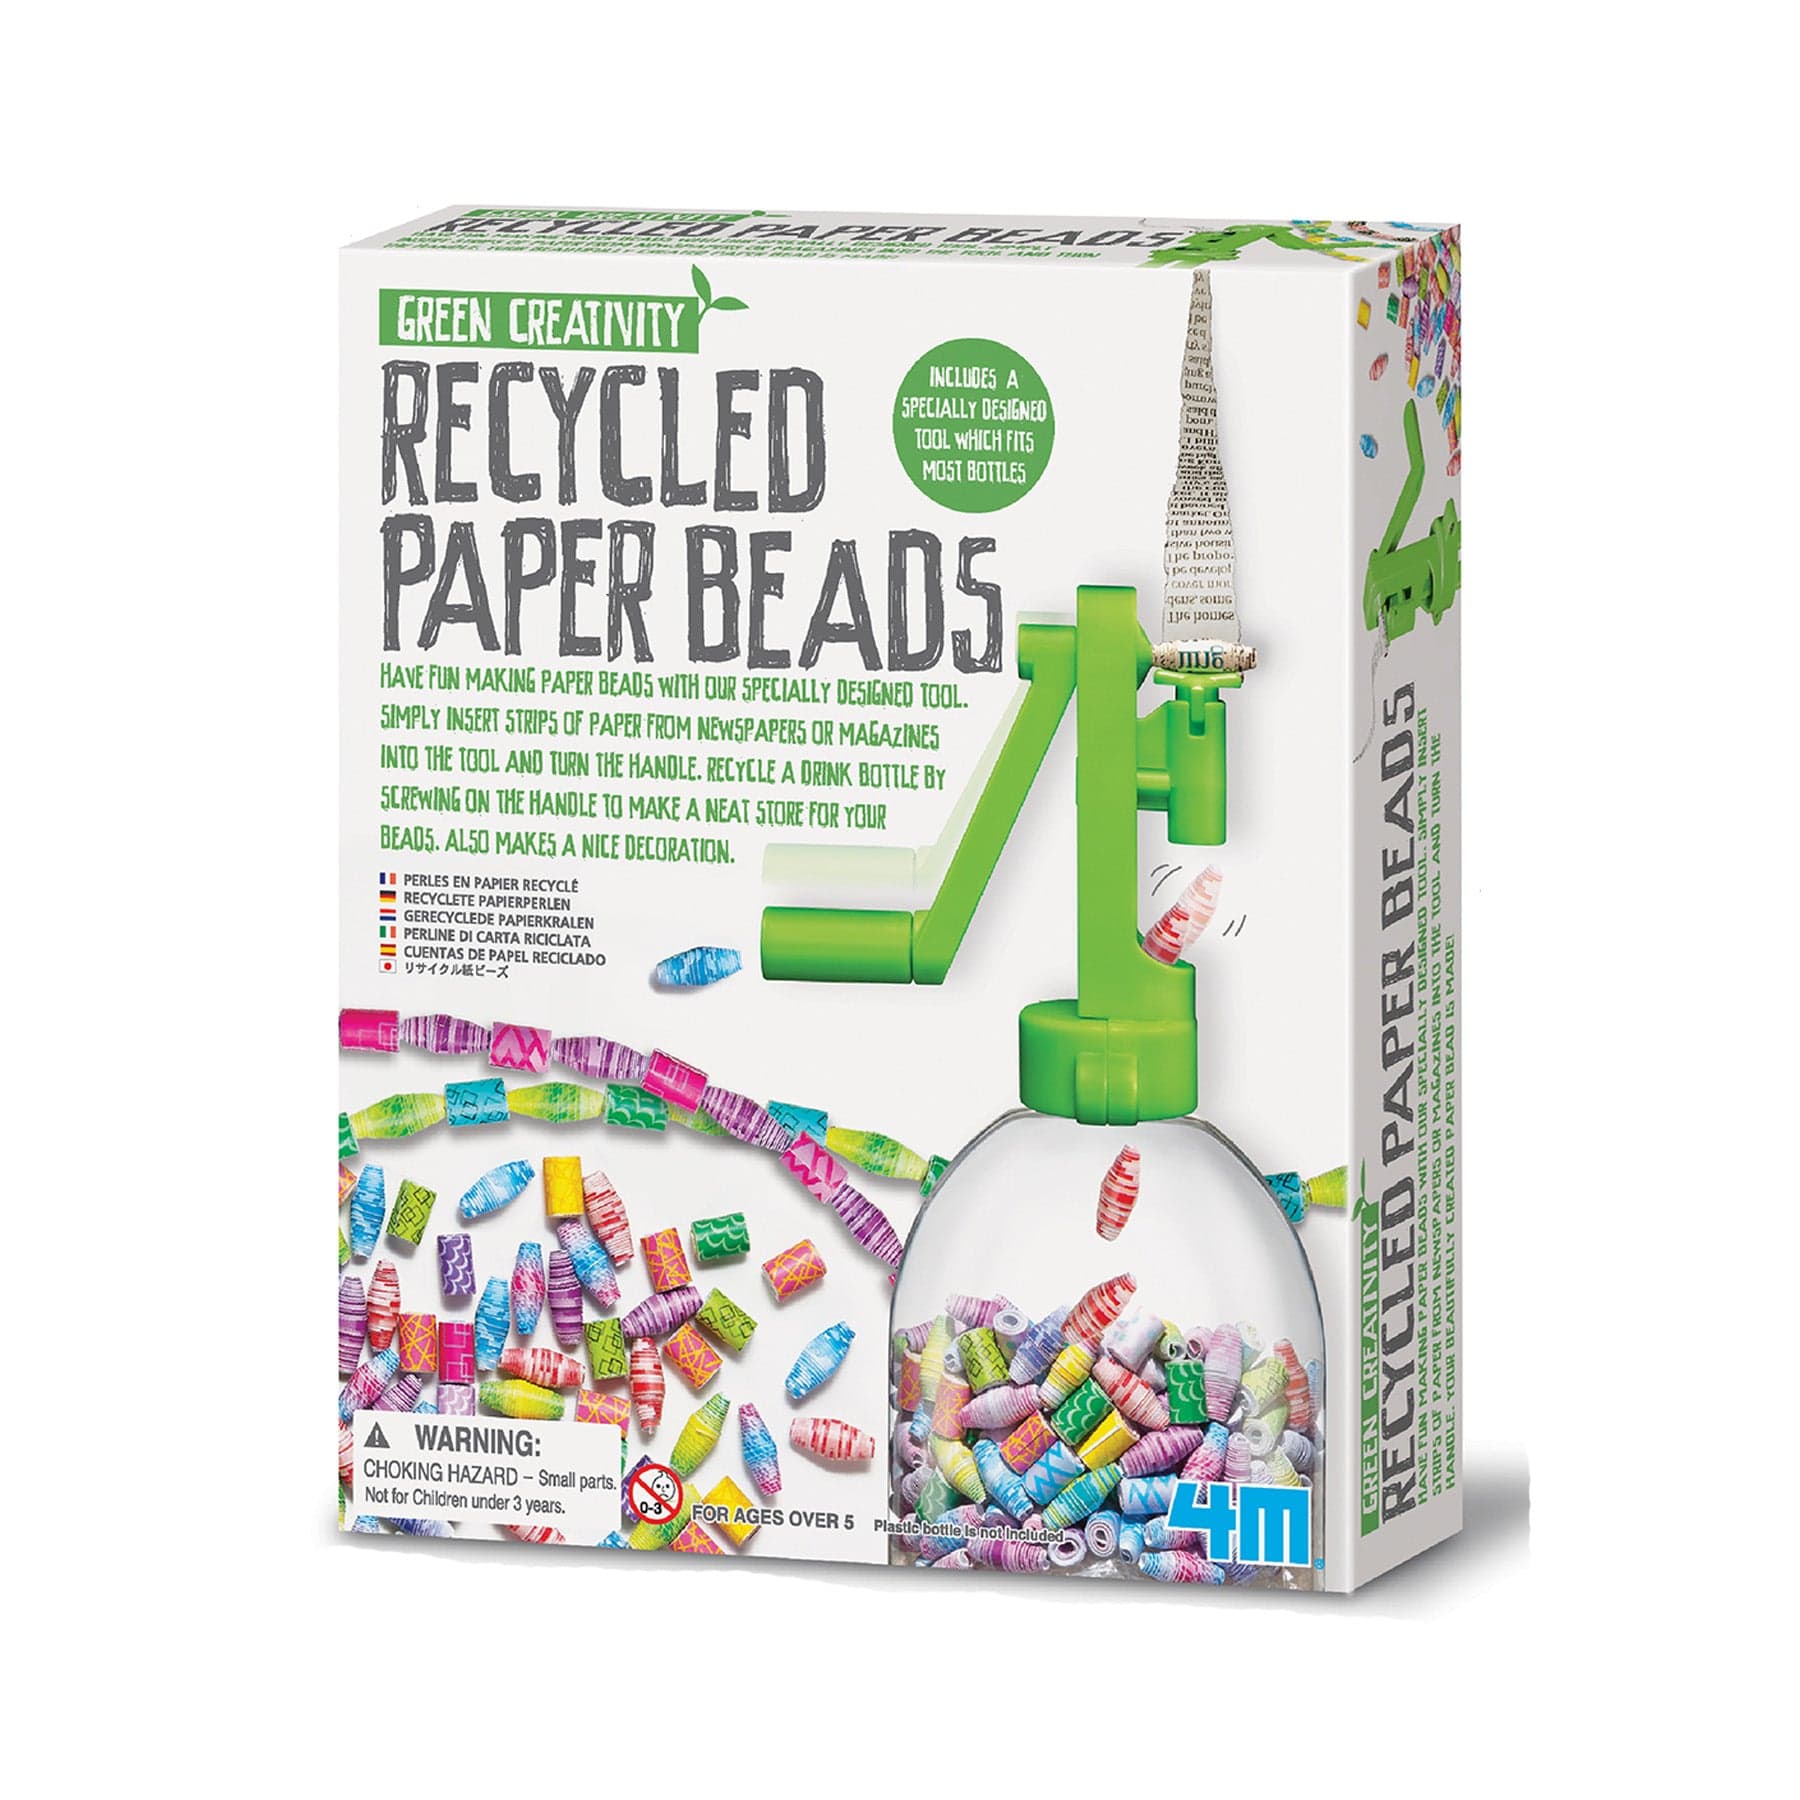 Recycled paper beads kit